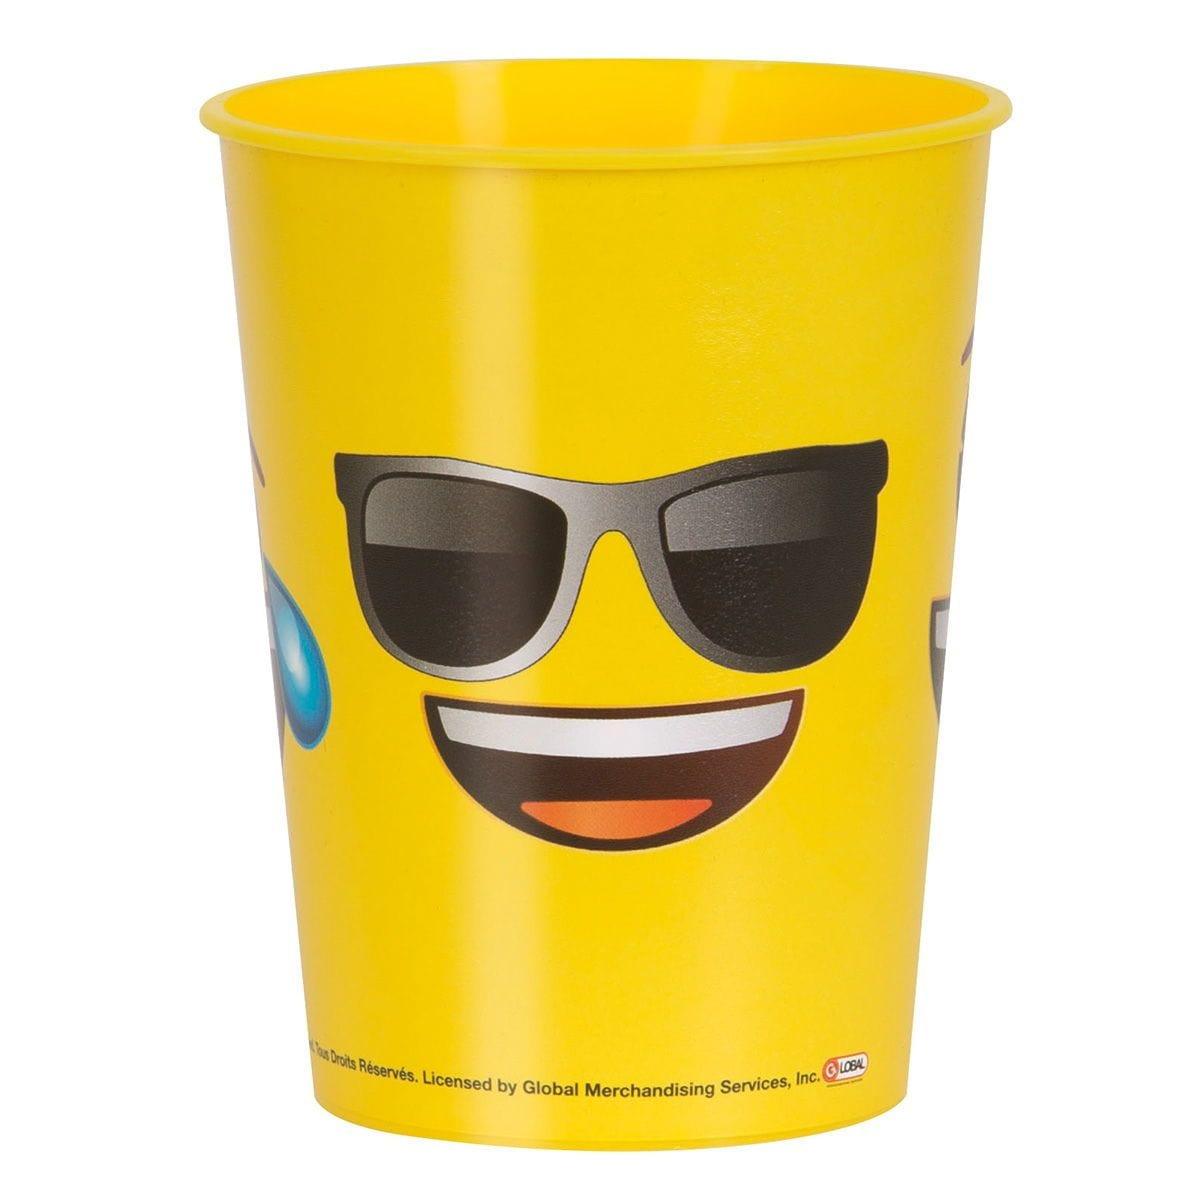 Buy Kids Birthday Emoji plastic favor cup sold at Party Expert